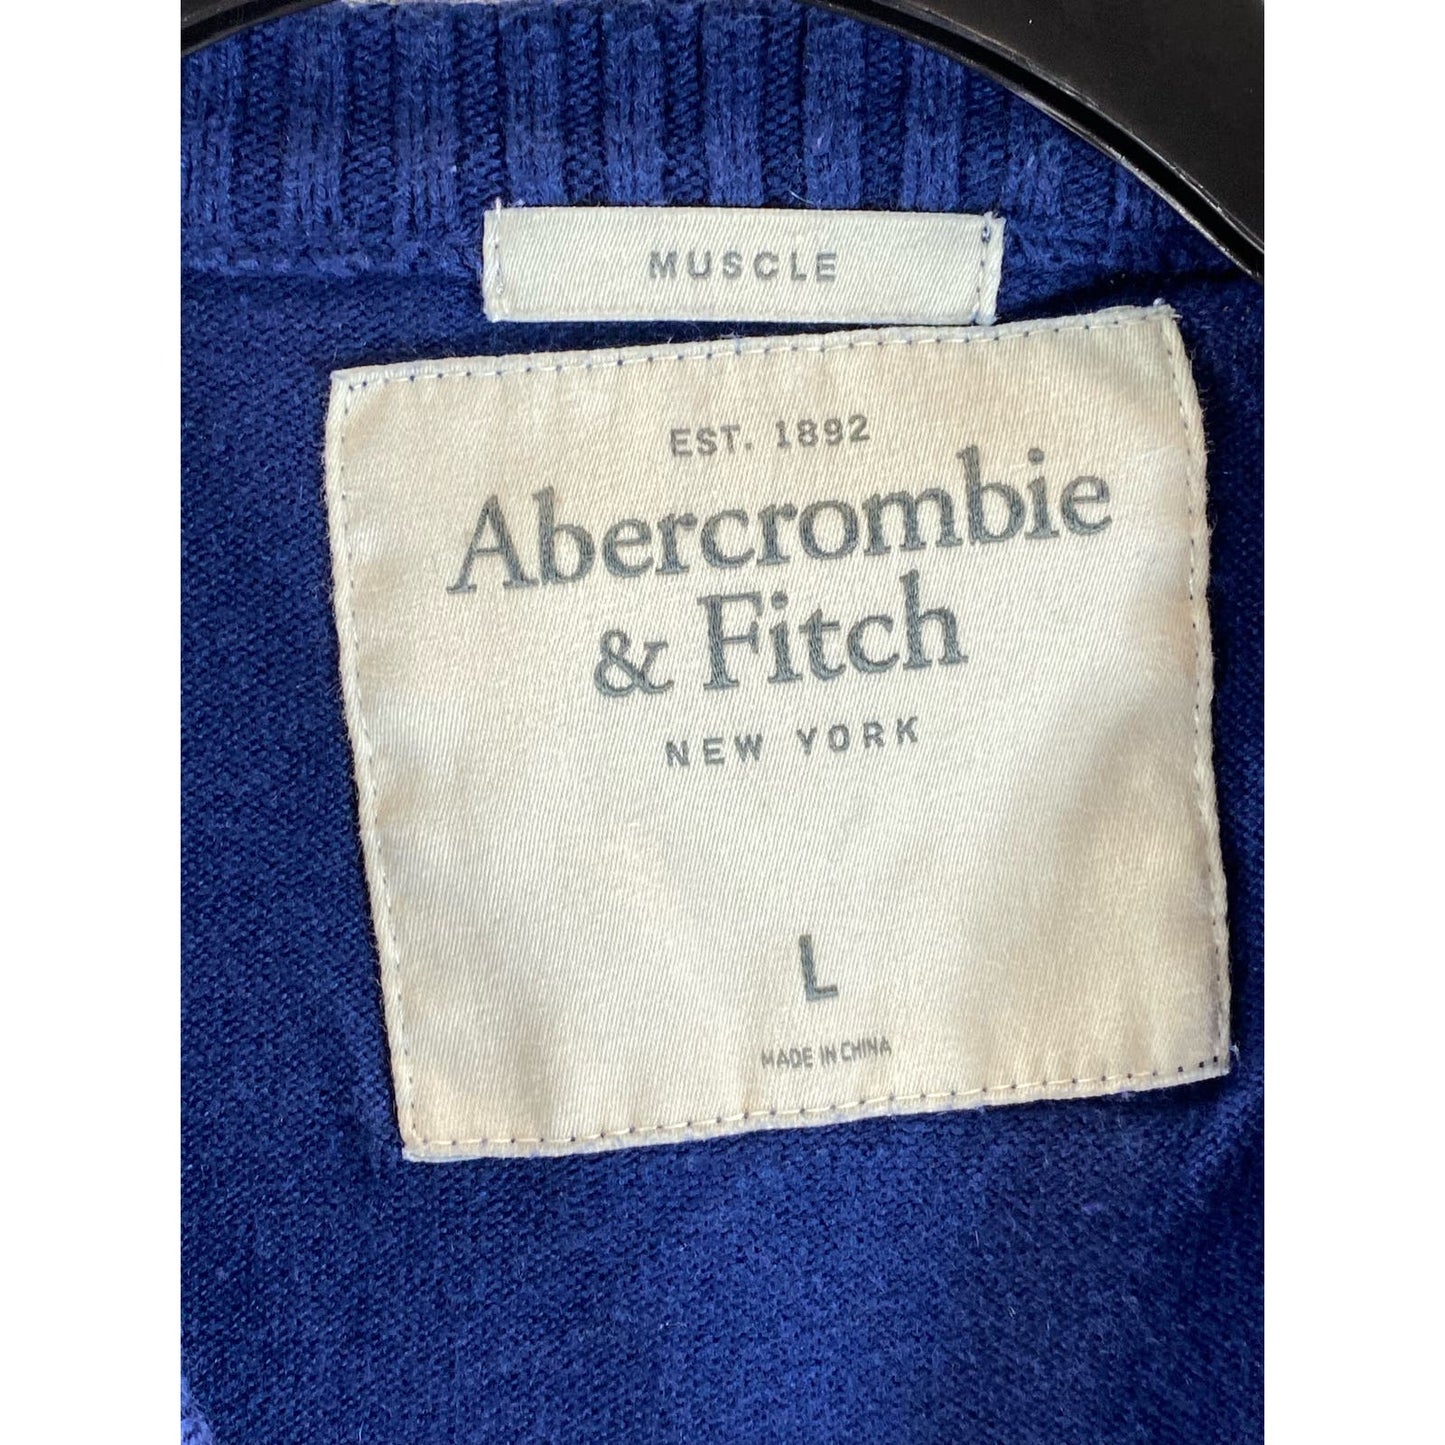 ABERCROMBIE & FITCH Men's Dark Blue V-Neck Muscle Pullover Sweater SZ L